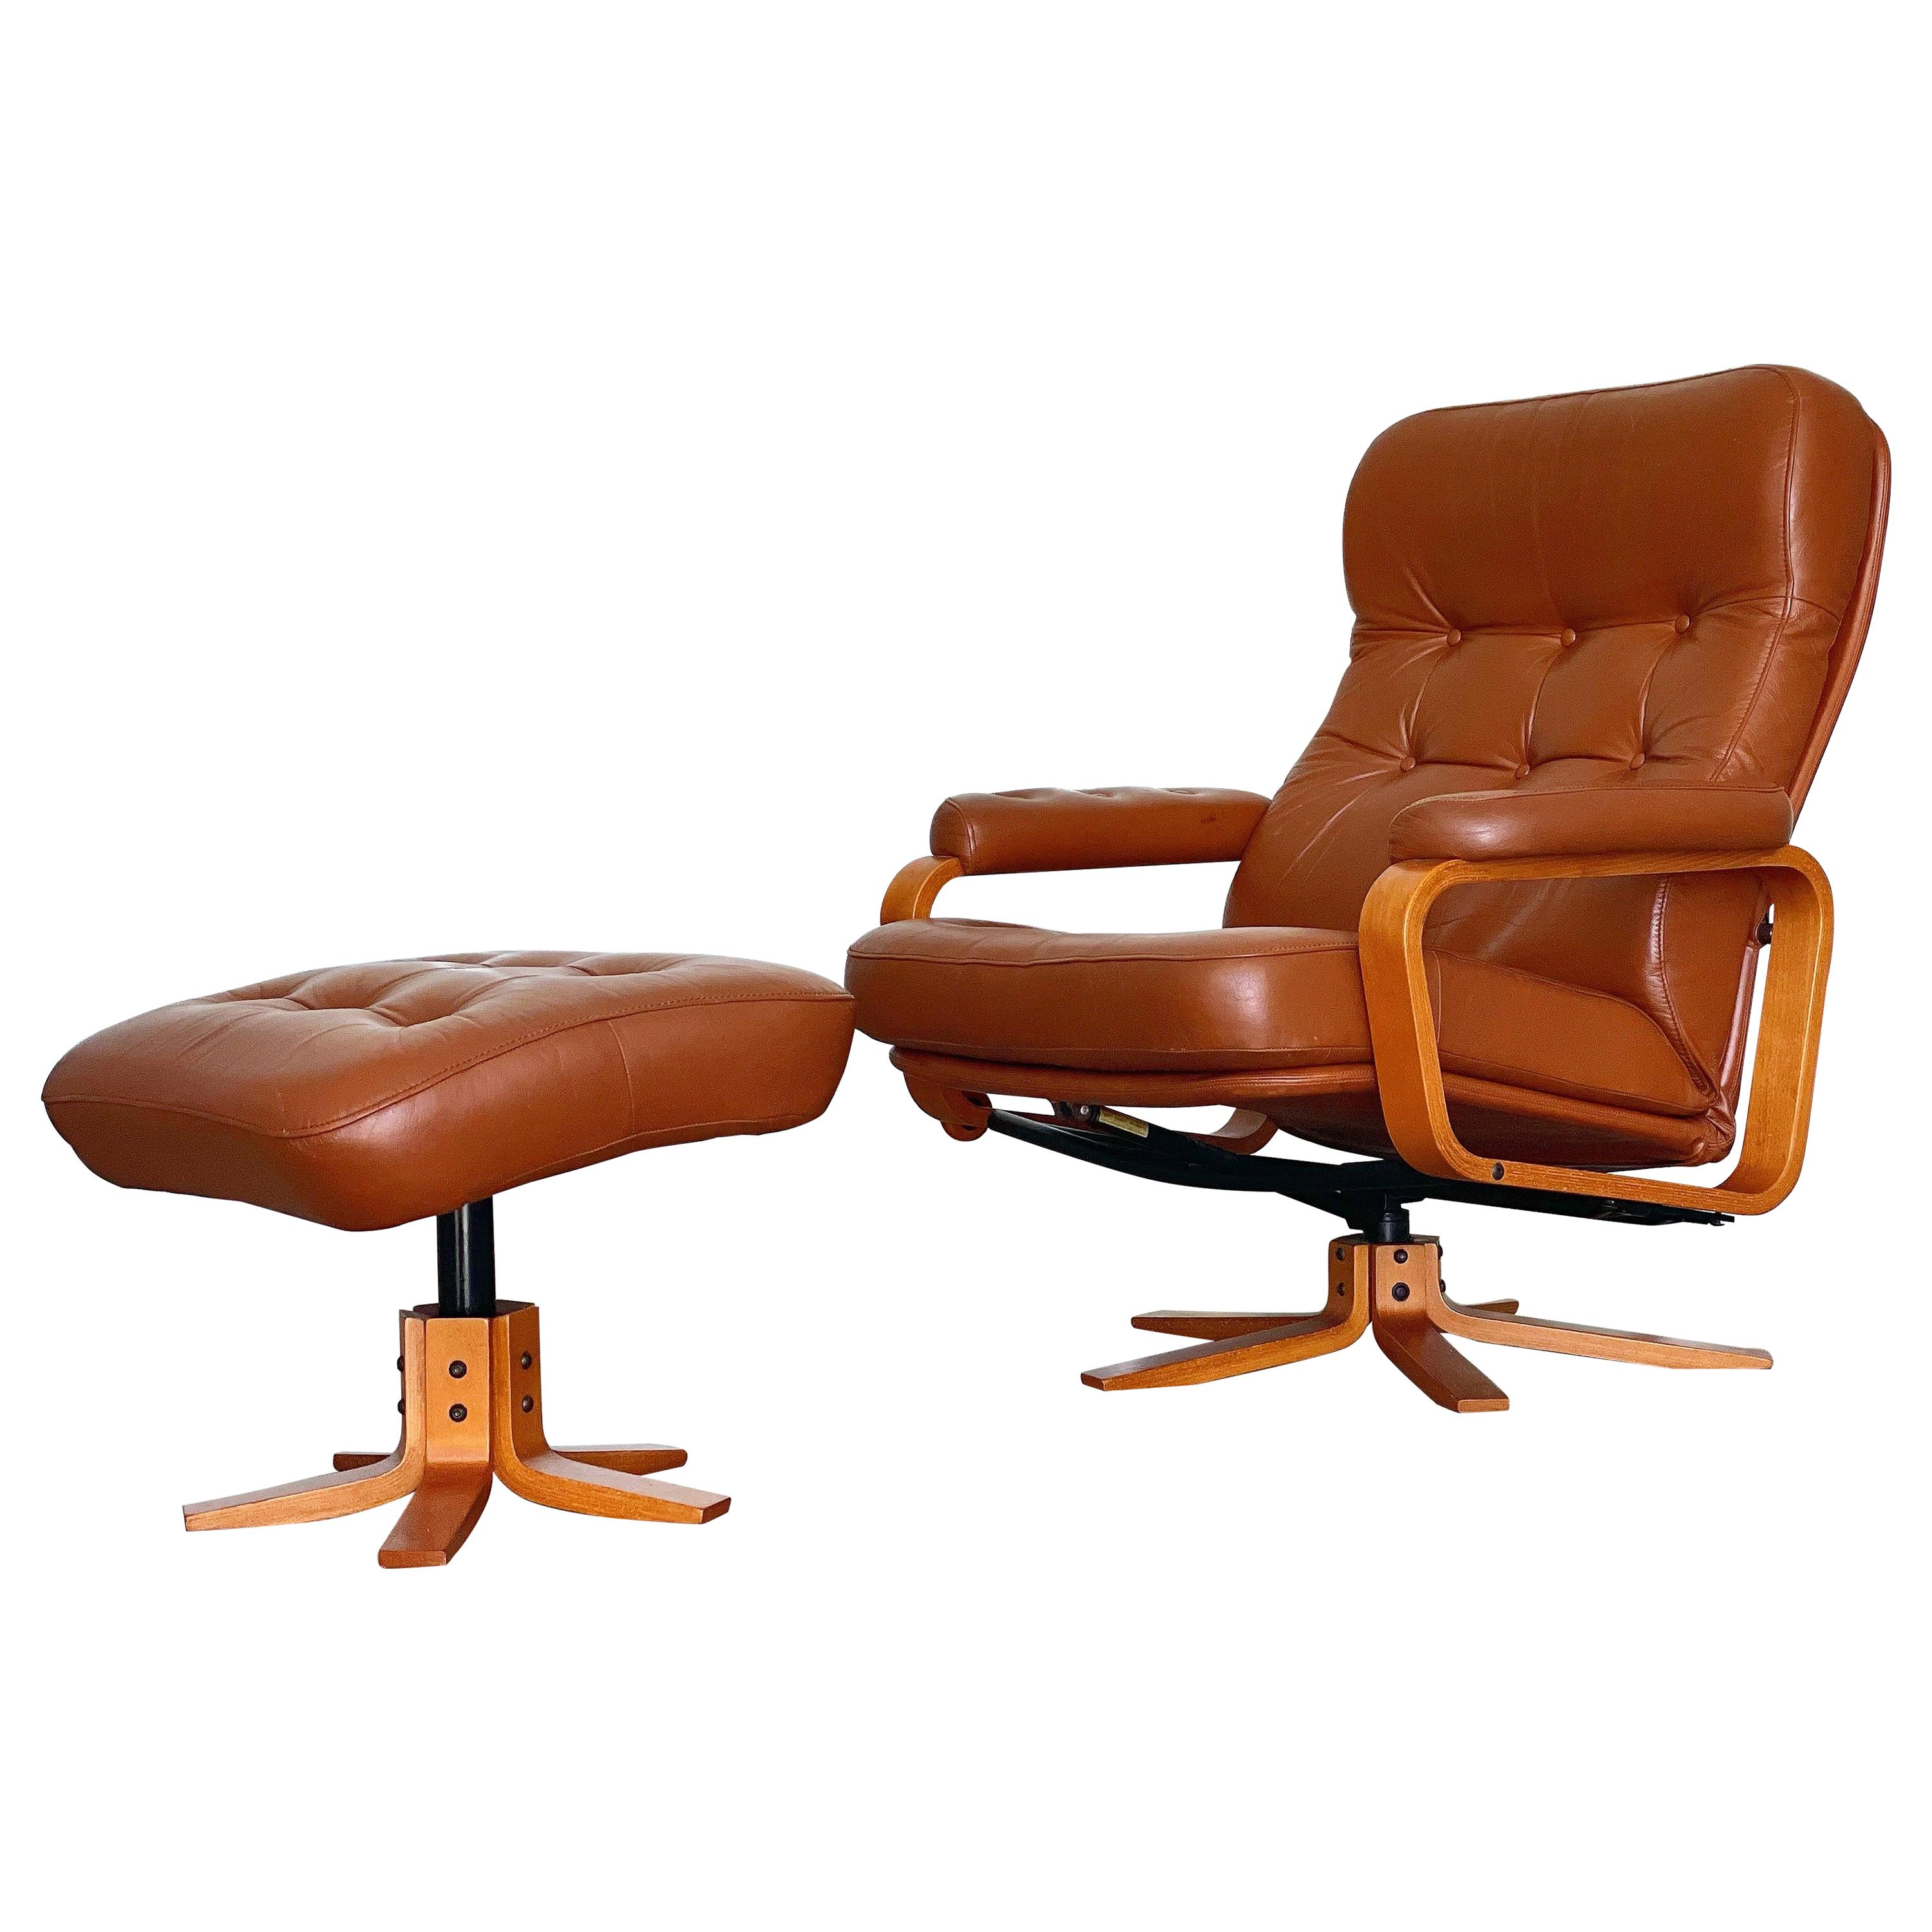 Midcentury Reclining Lounge Chair and Ottoman in Leather + Teak by Svend Skipper